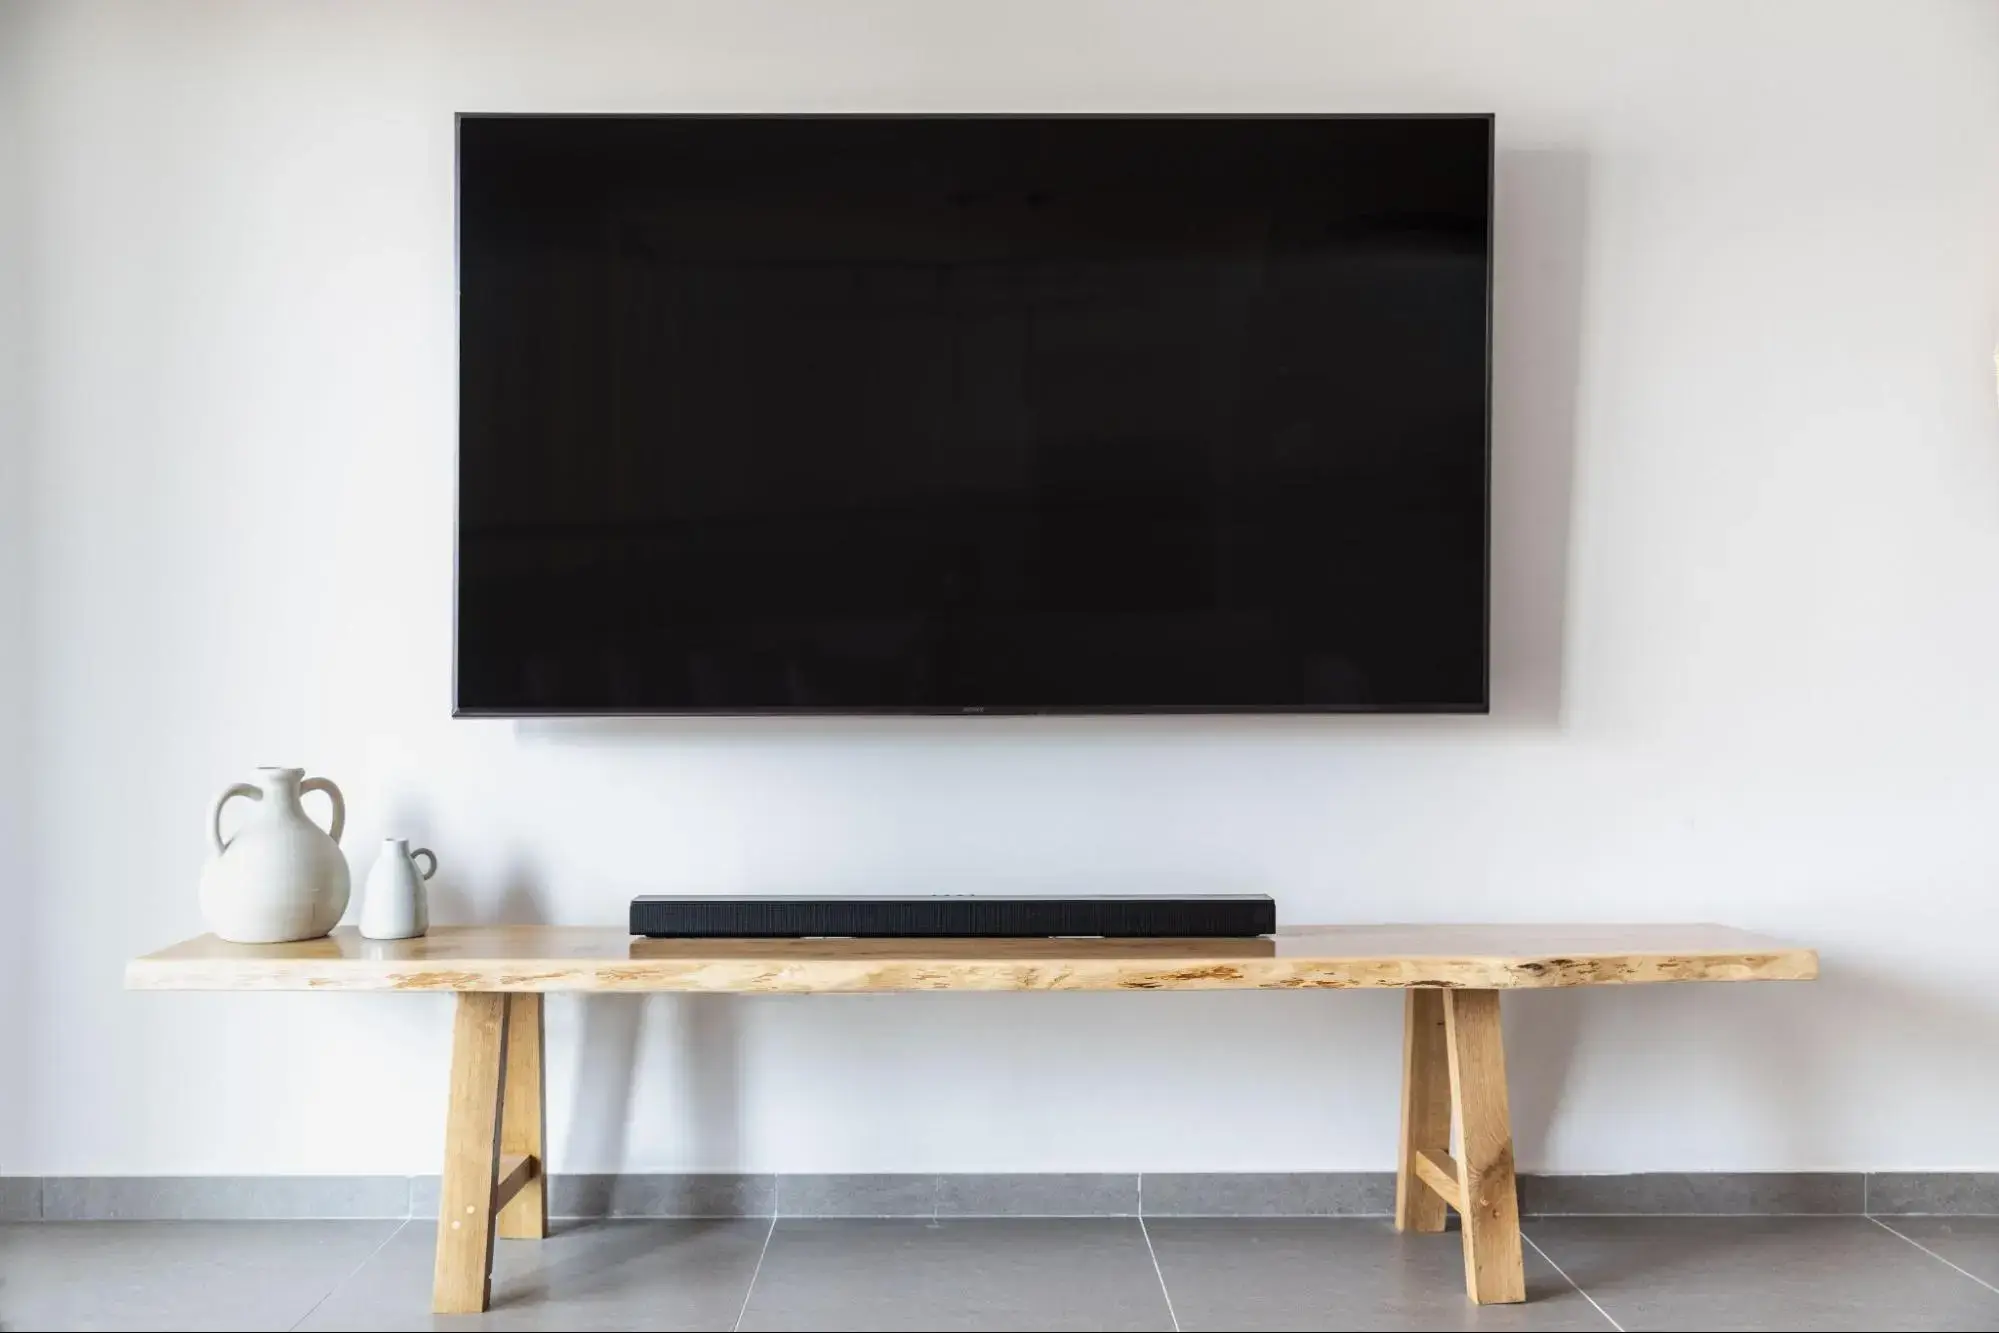 A large flat screen tv is installed on a white wall. A wooden bench with a sound bar and a few vases sits below it.